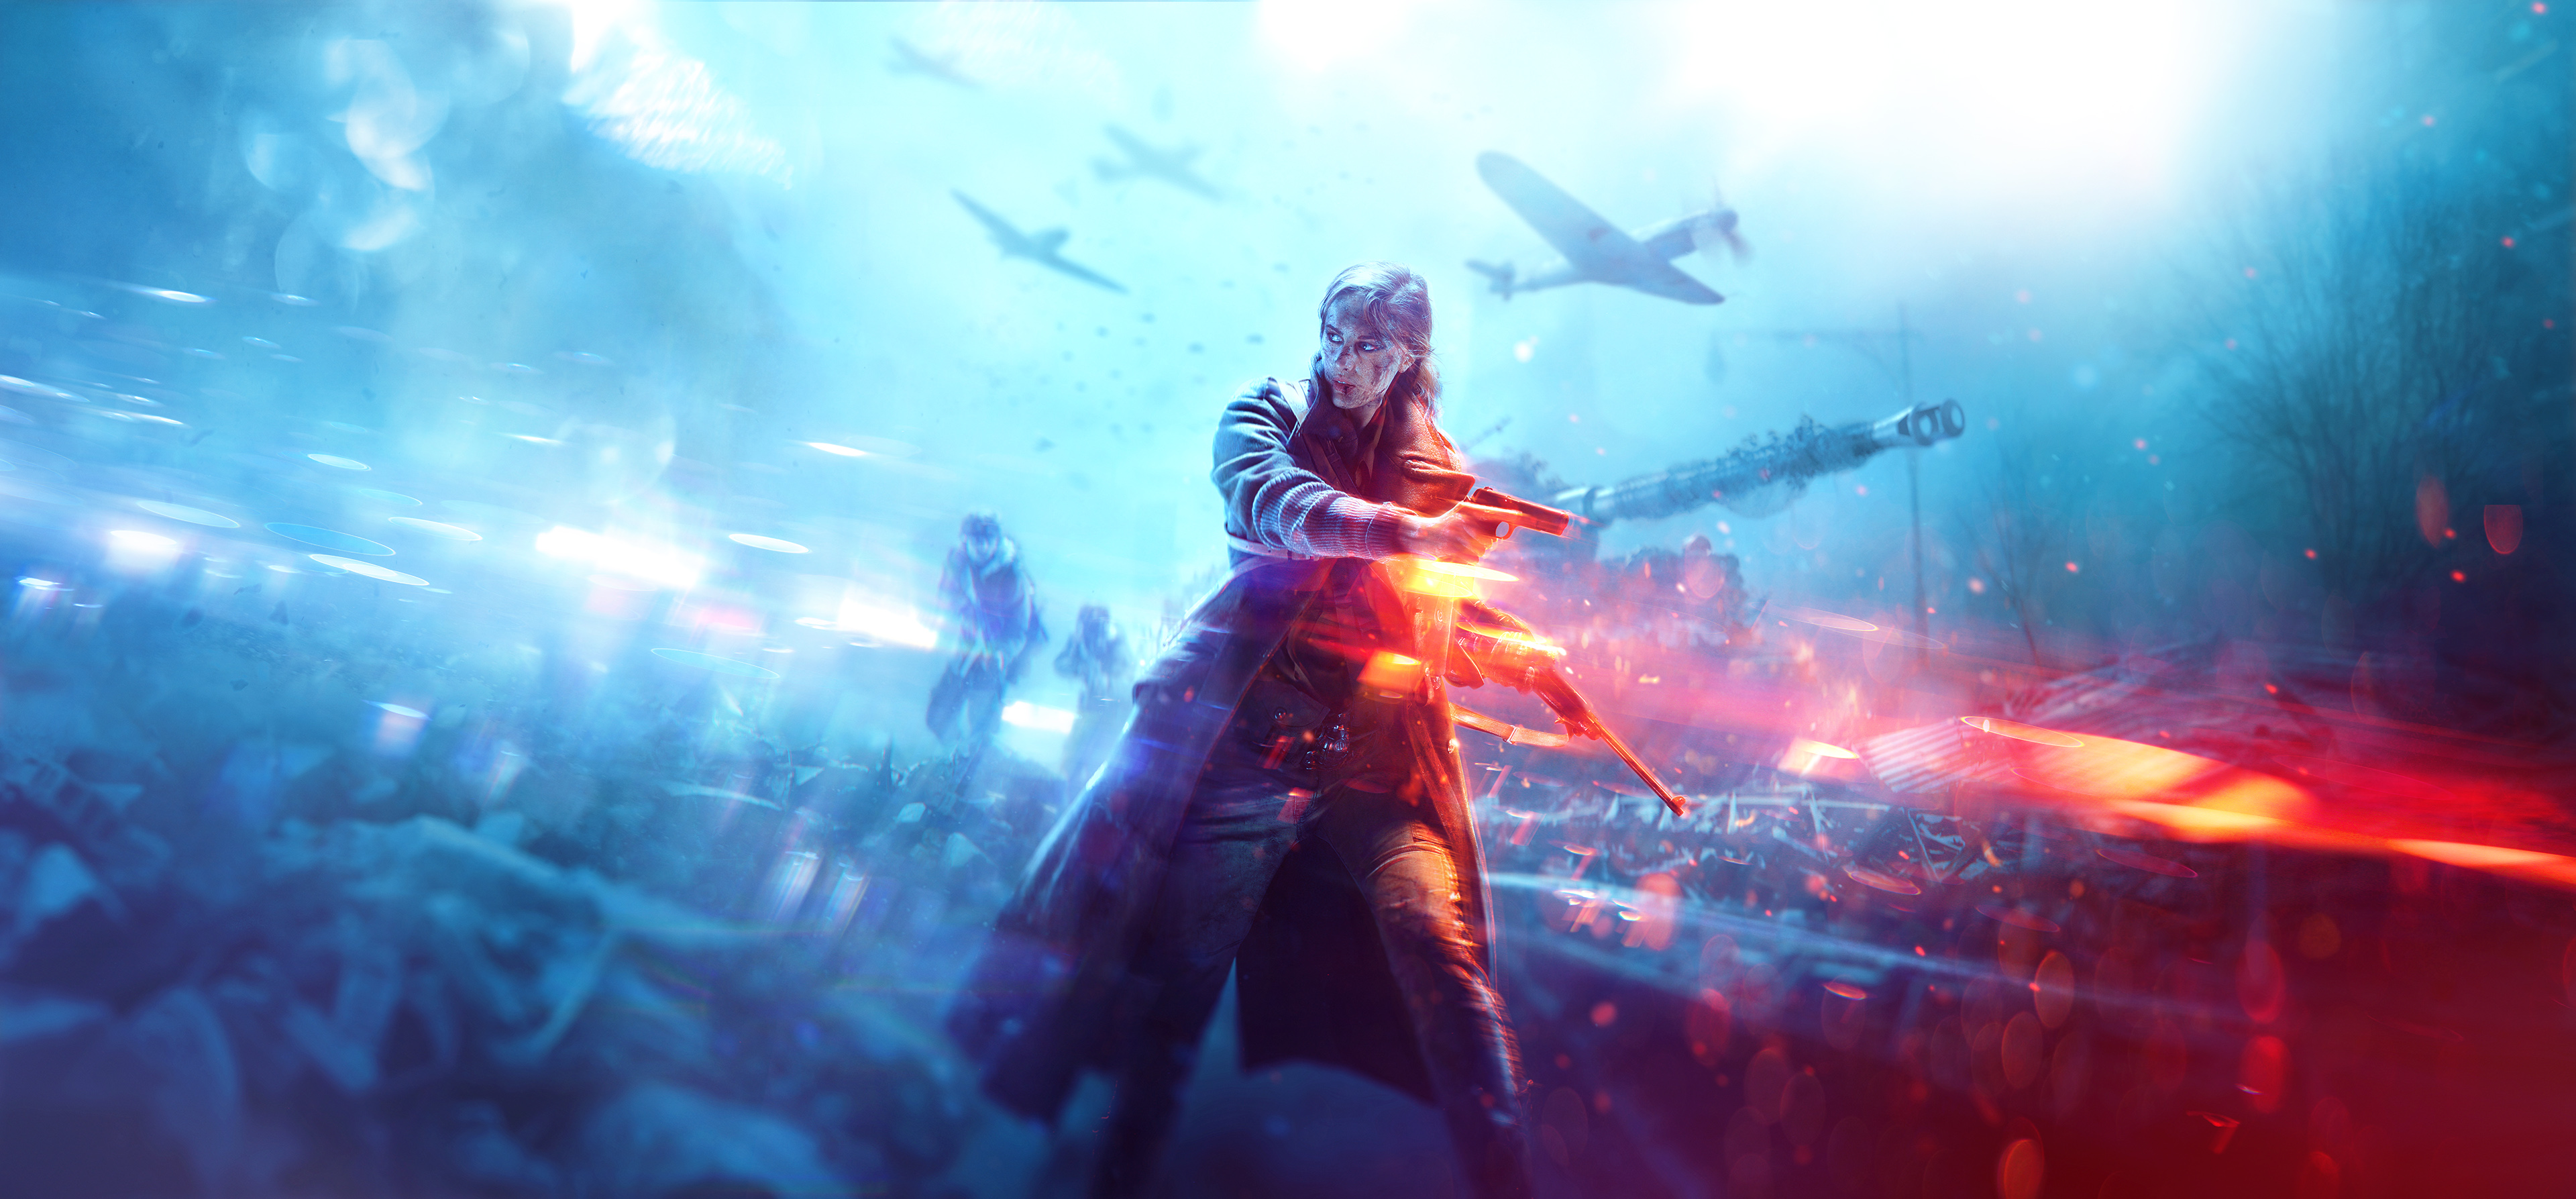 Battlefield V Warrior Girl 4k, HD Games, 4k Wallpapers, Images, Backgrounds, Photos and Pictures